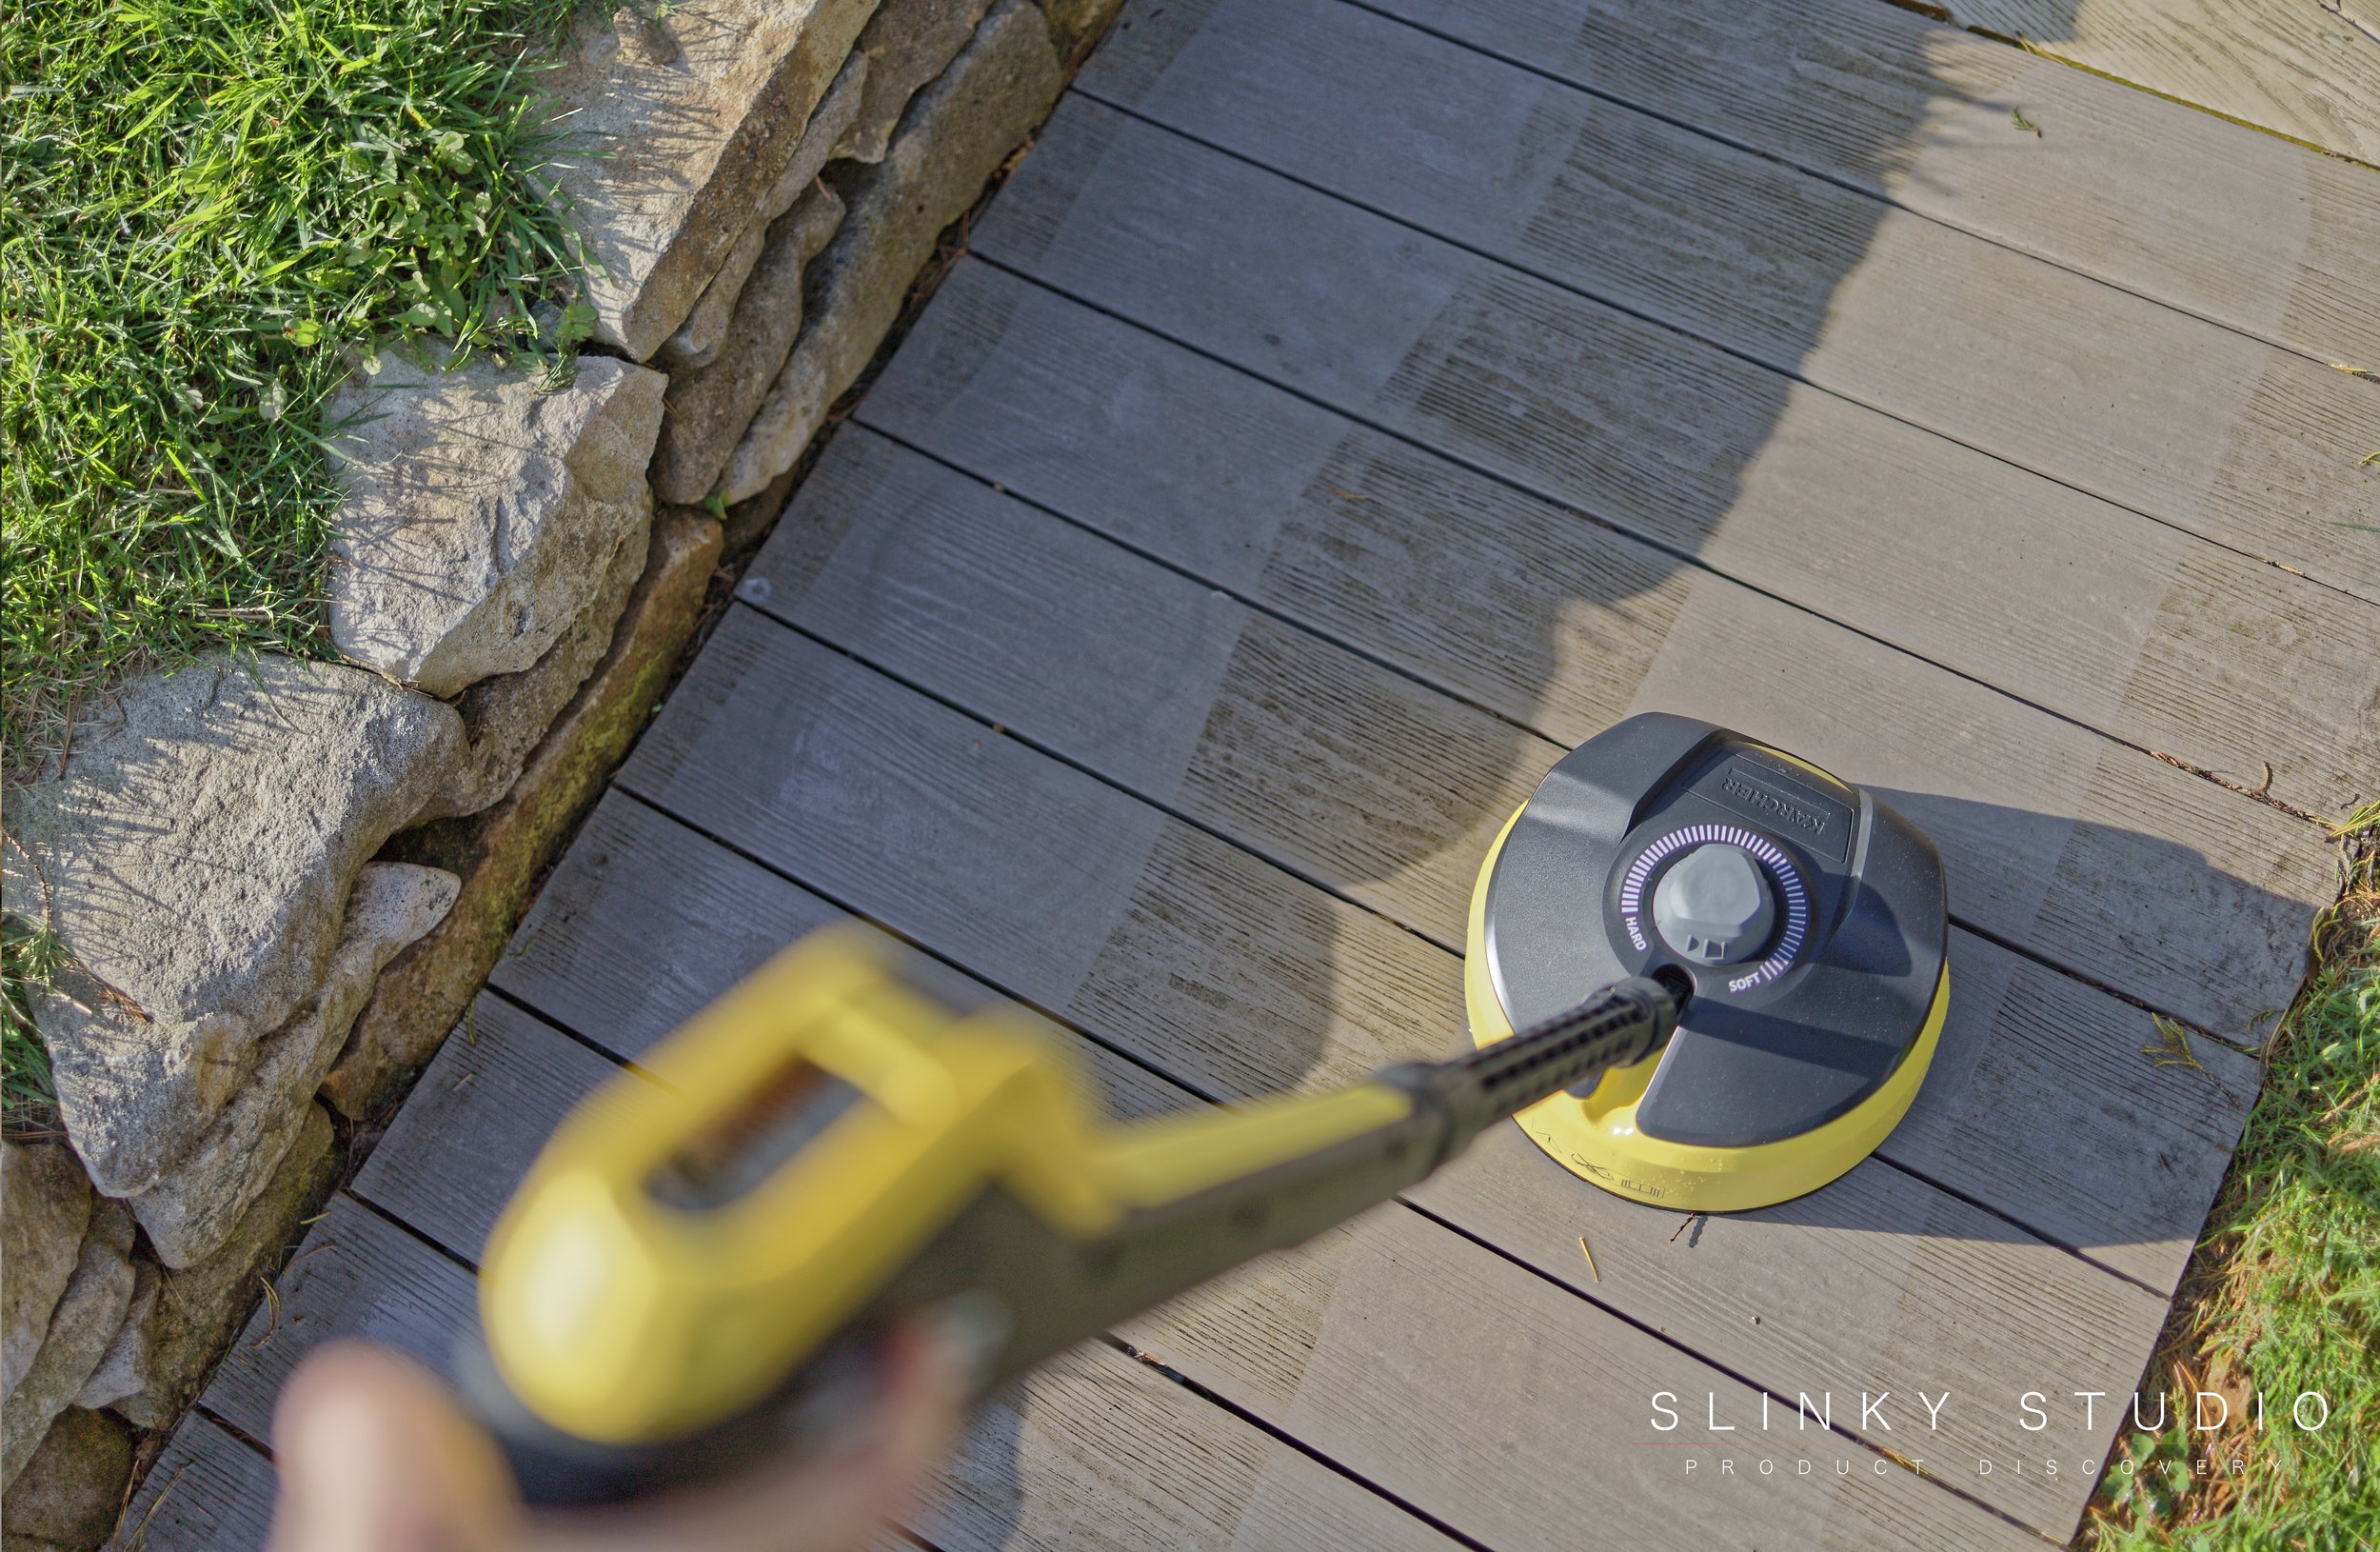 Karcher K4 Pressure Washer T 5 T-Racer Cleaning Composite Decking Before and After.jpg